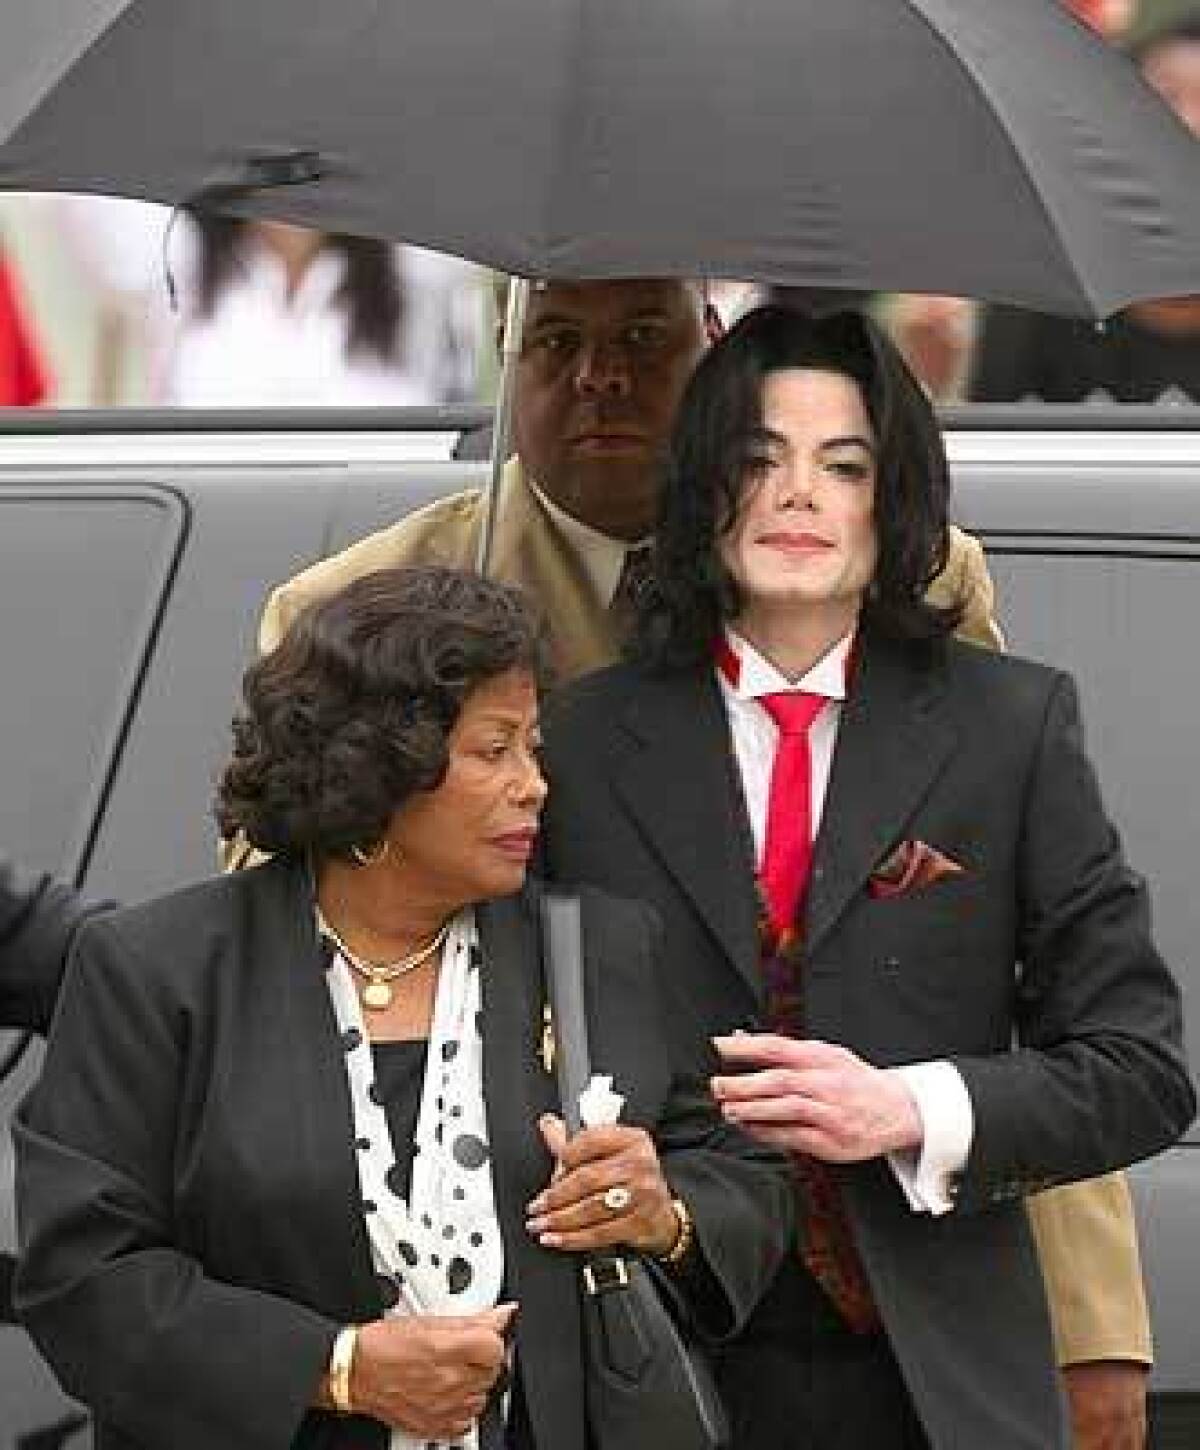 Michael Jackson arrives at the Santa Barbara County courthouse with his mother, Katherine, in May 2005, during his trial on child-molestation charges.